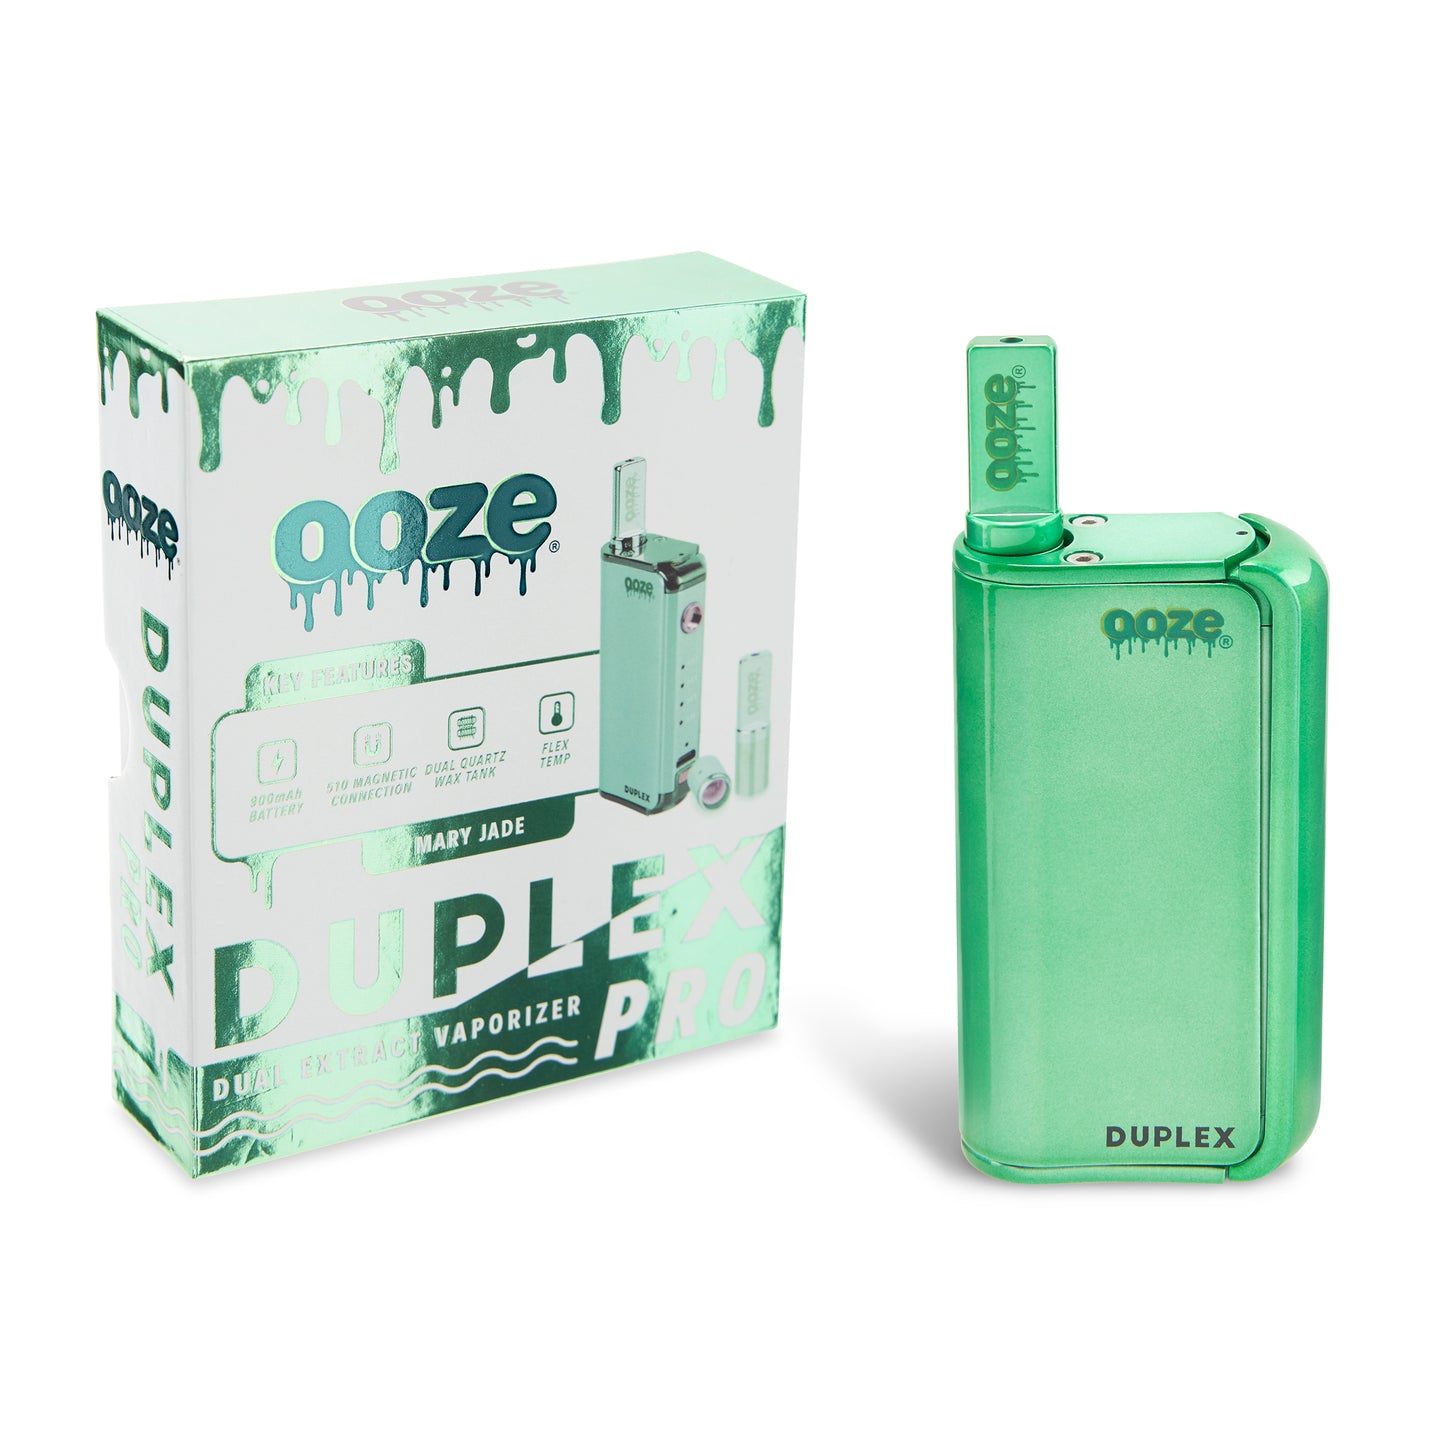 The Mary Jade Ooze Duplex Pro Vaporizer is shown next to the packaging with the wax atomizer inserted.